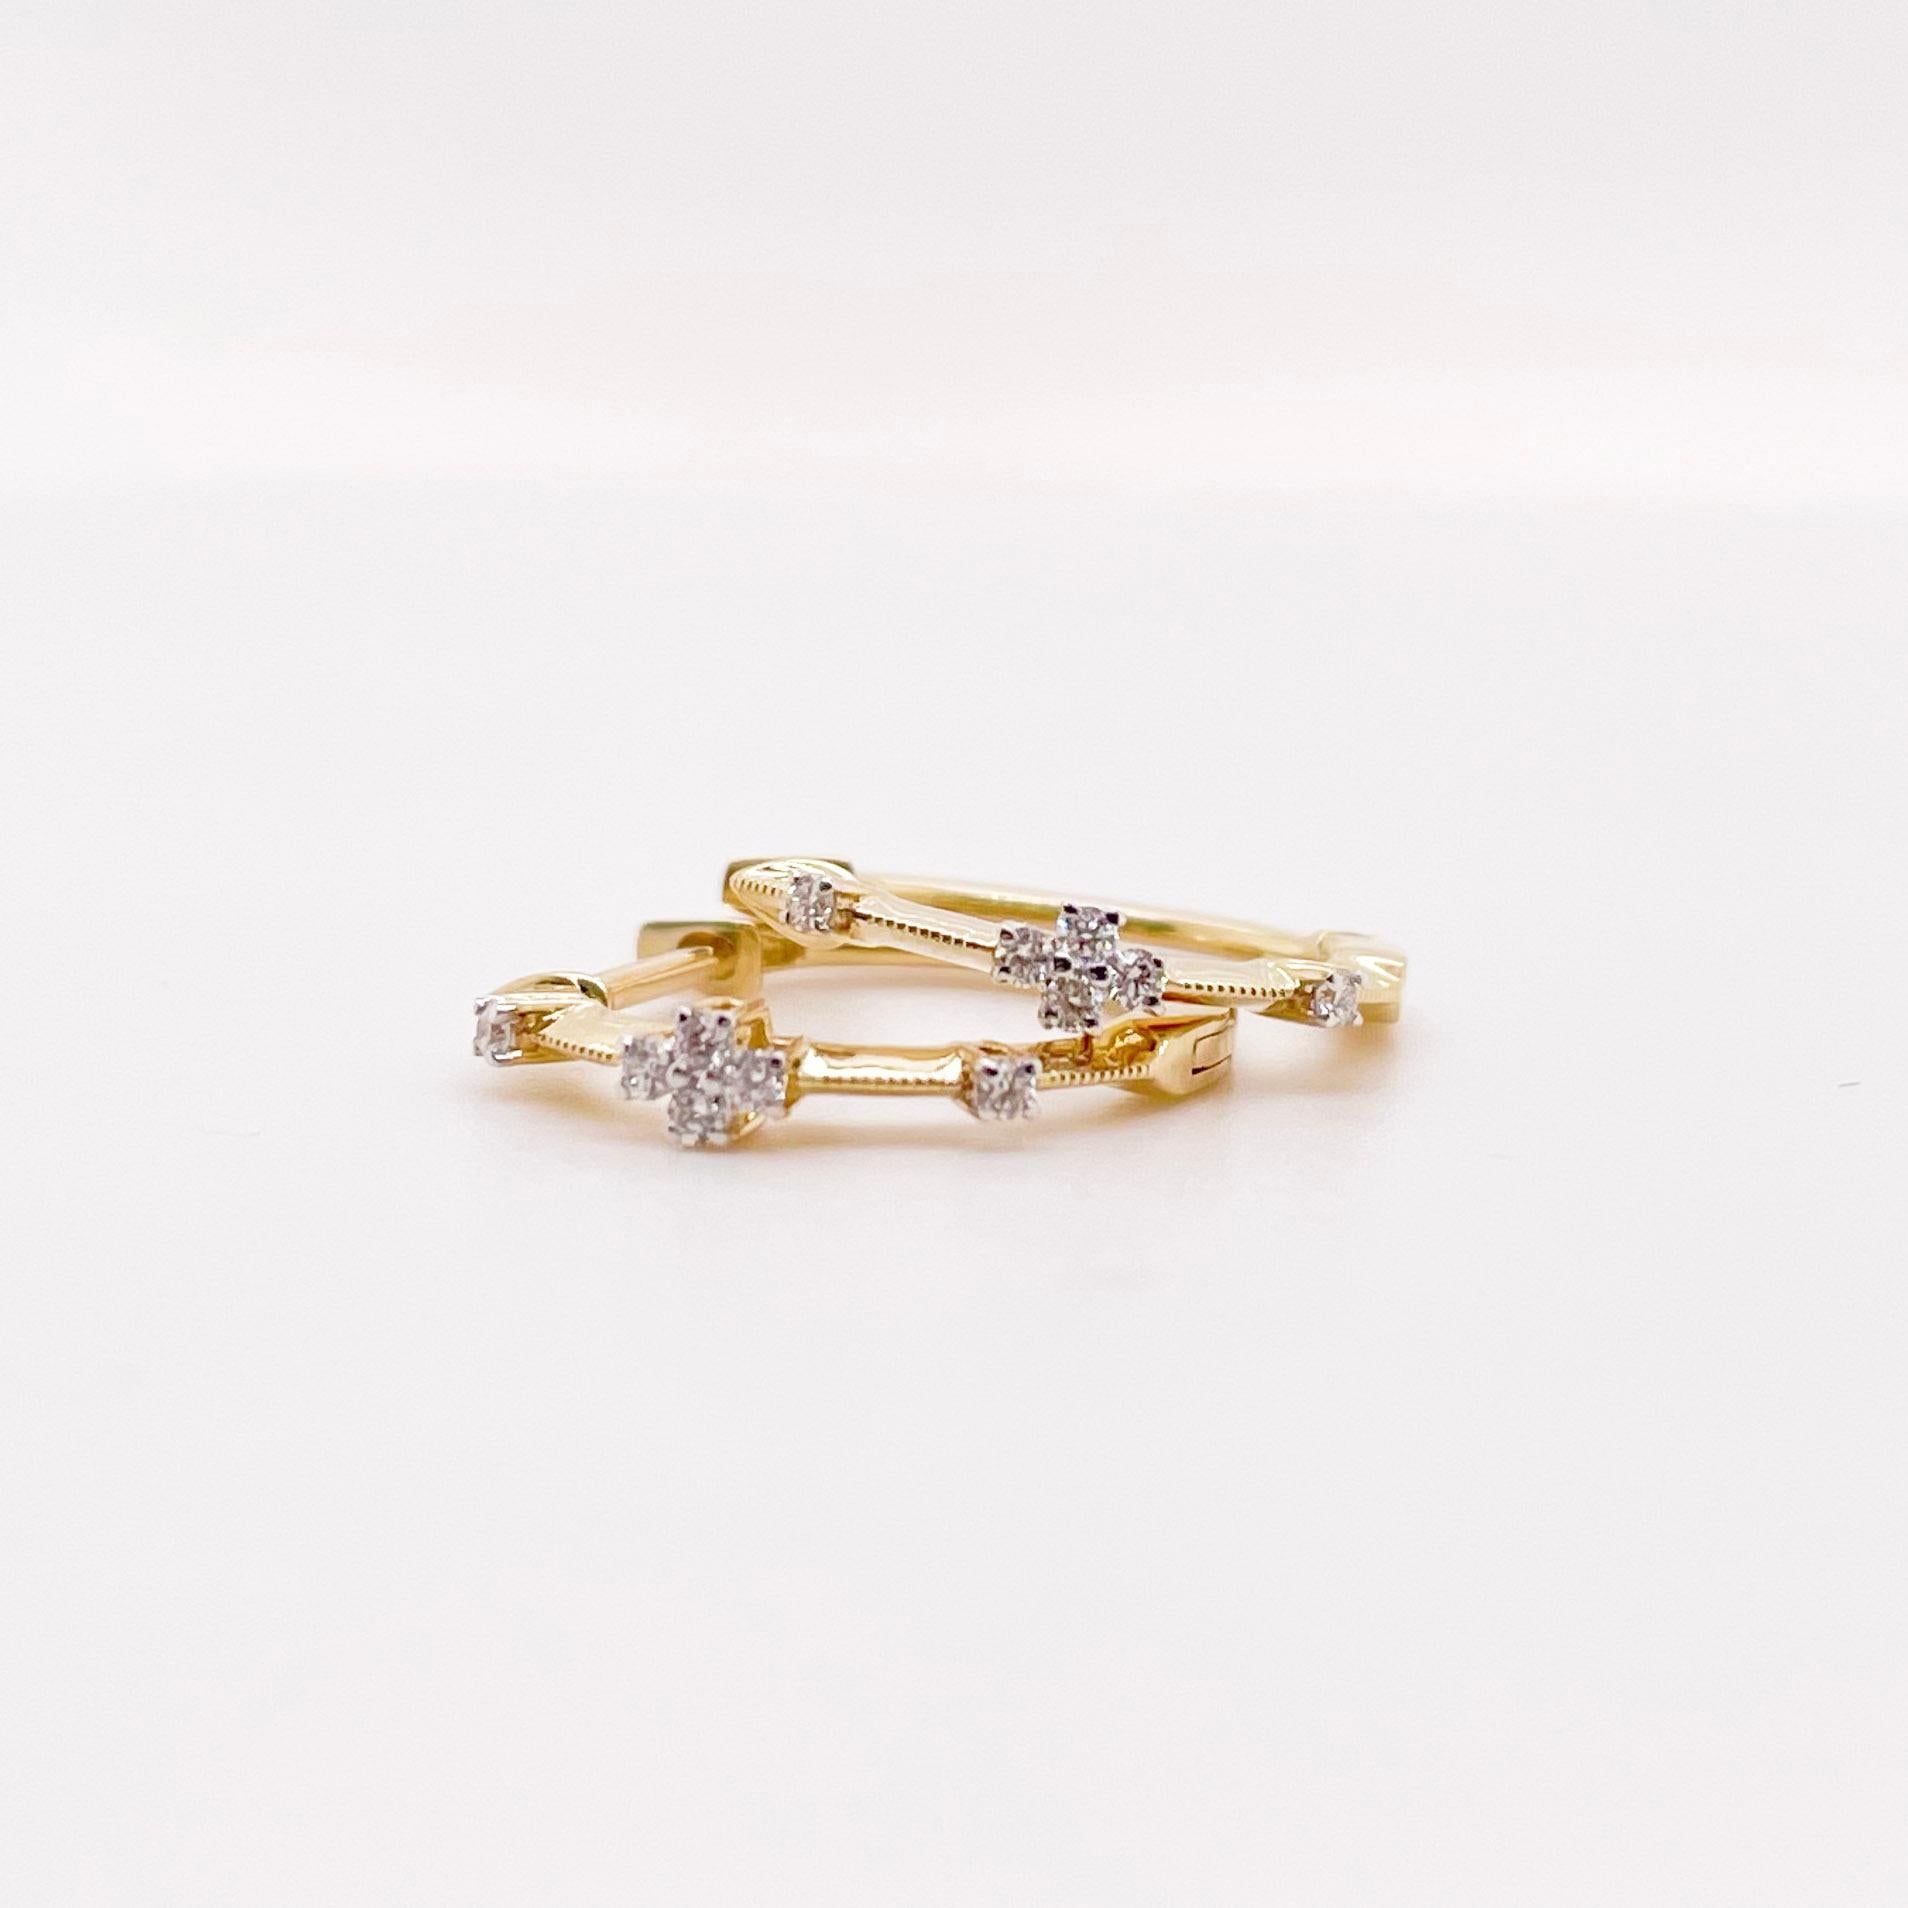 These stunning diamond hoops have unique design that are timeless and will compliment any look it is paired with. You will love these earrings!
The details for these gorgeous earrings are listed below:
1 Set
Metal Quality: 14K Yellow Gold
Earring